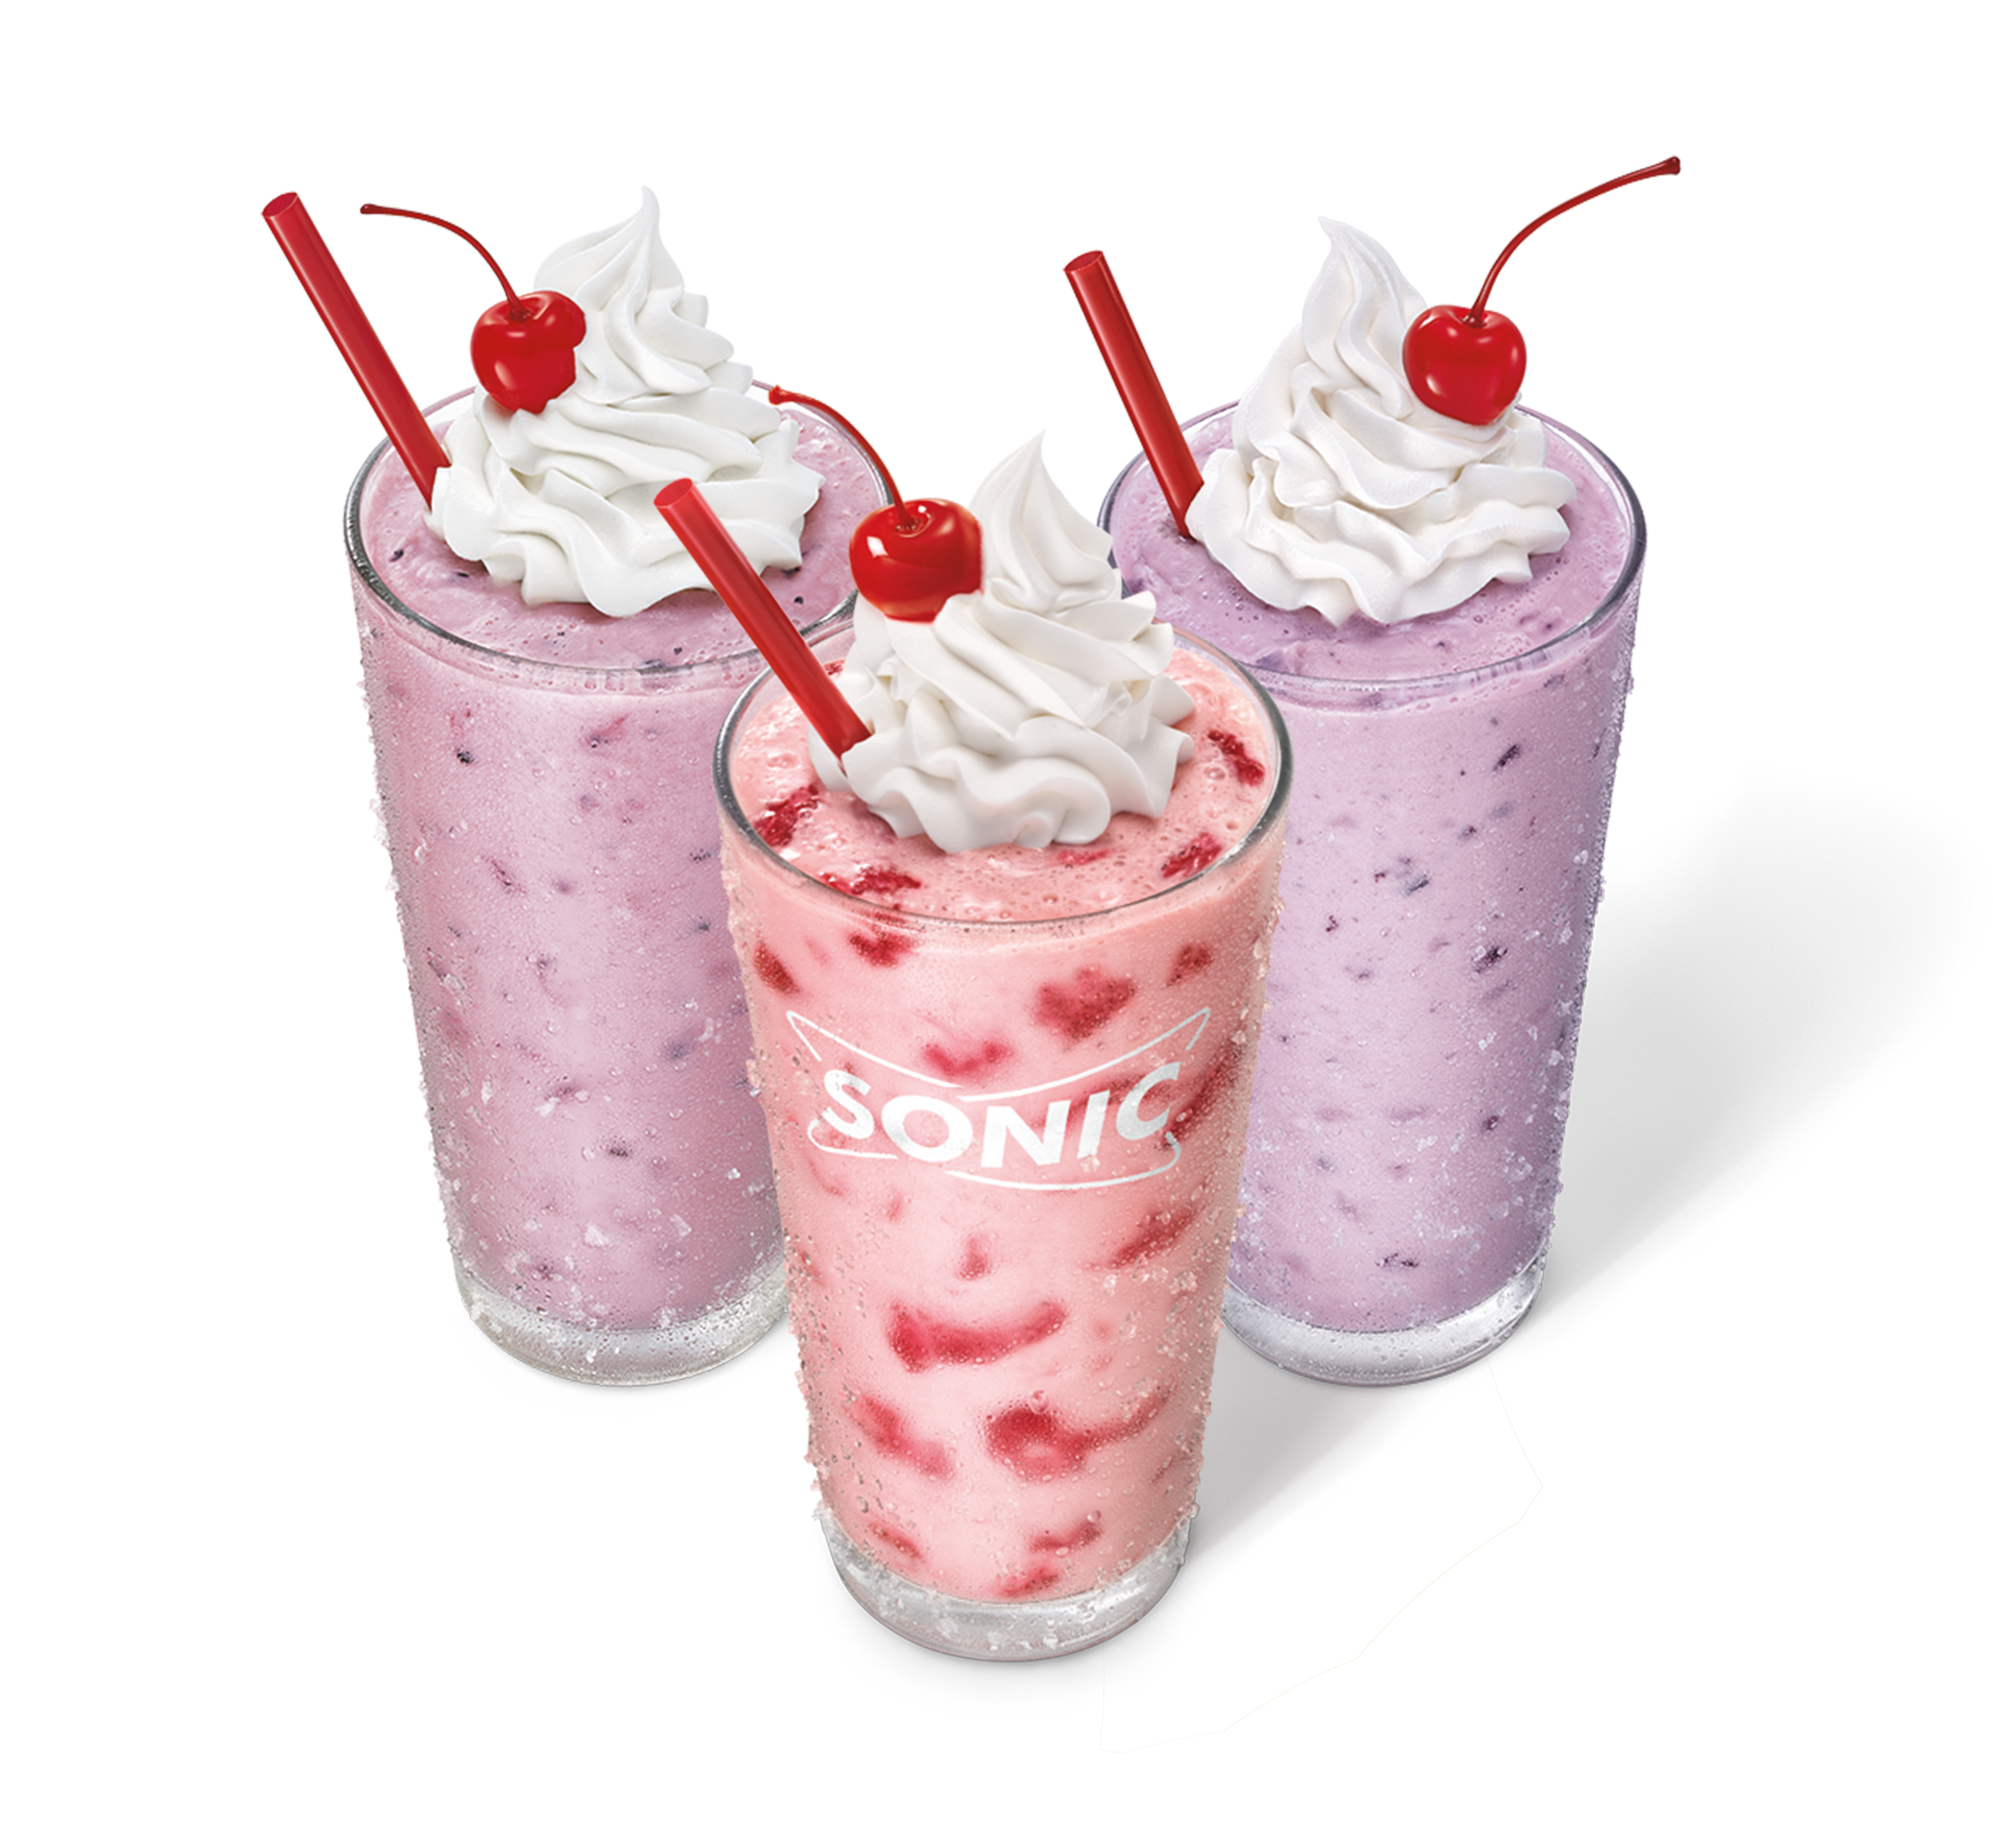 SONIC’s New Real Fruit Berry Shakes Are the Real Deal Business Wire